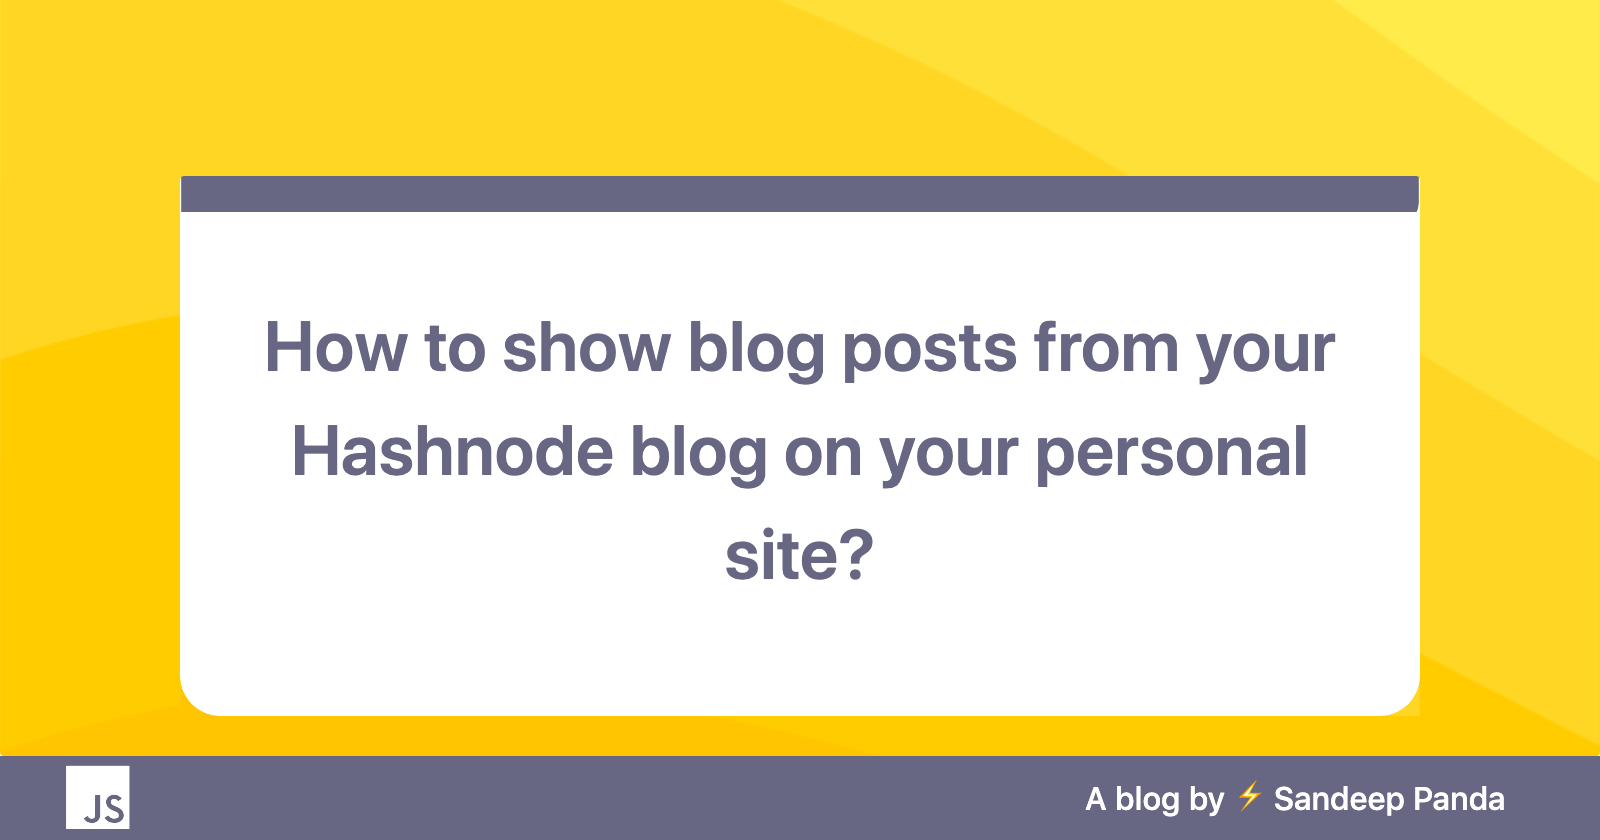 How to show blog posts from your Hashnode blog on your personal site?